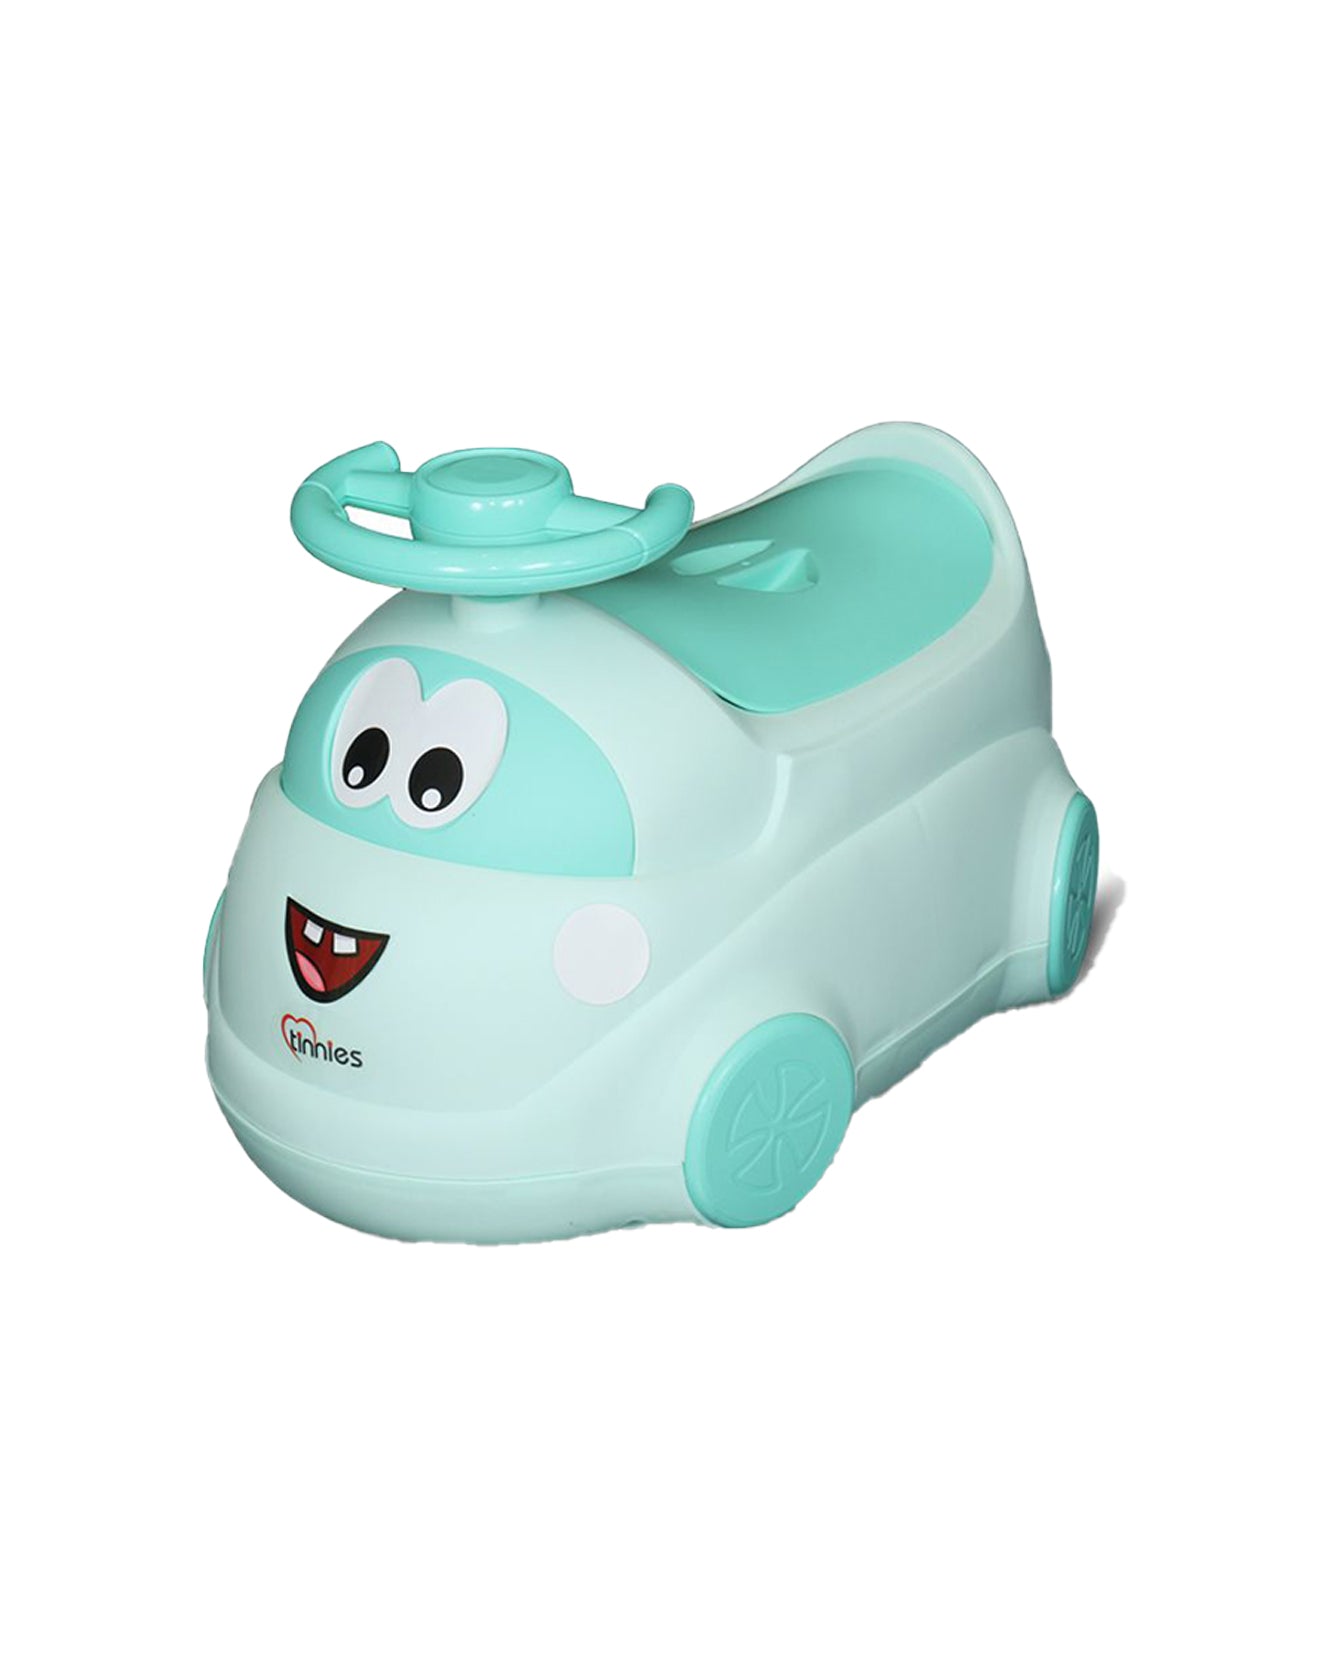 Tinnies Baby Driver Potty (Multi Color)